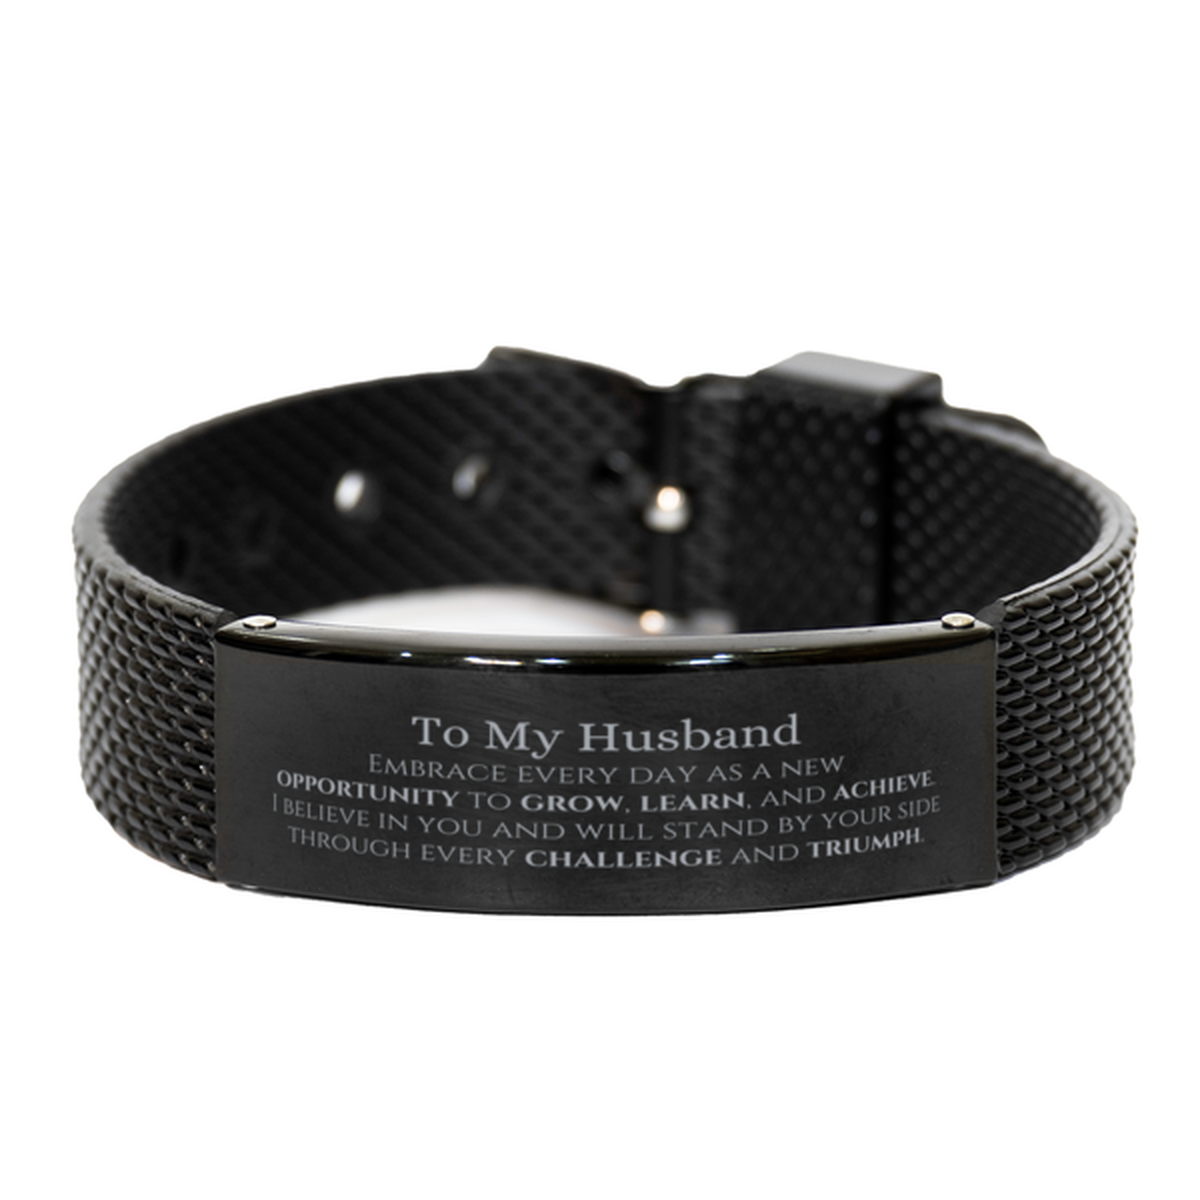 To My Husband Gifts, I believe in you and will stand by your side, Inspirational Black Shark Mesh Bracelet For Husband, Birthday Christmas Motivational Husband Gifts